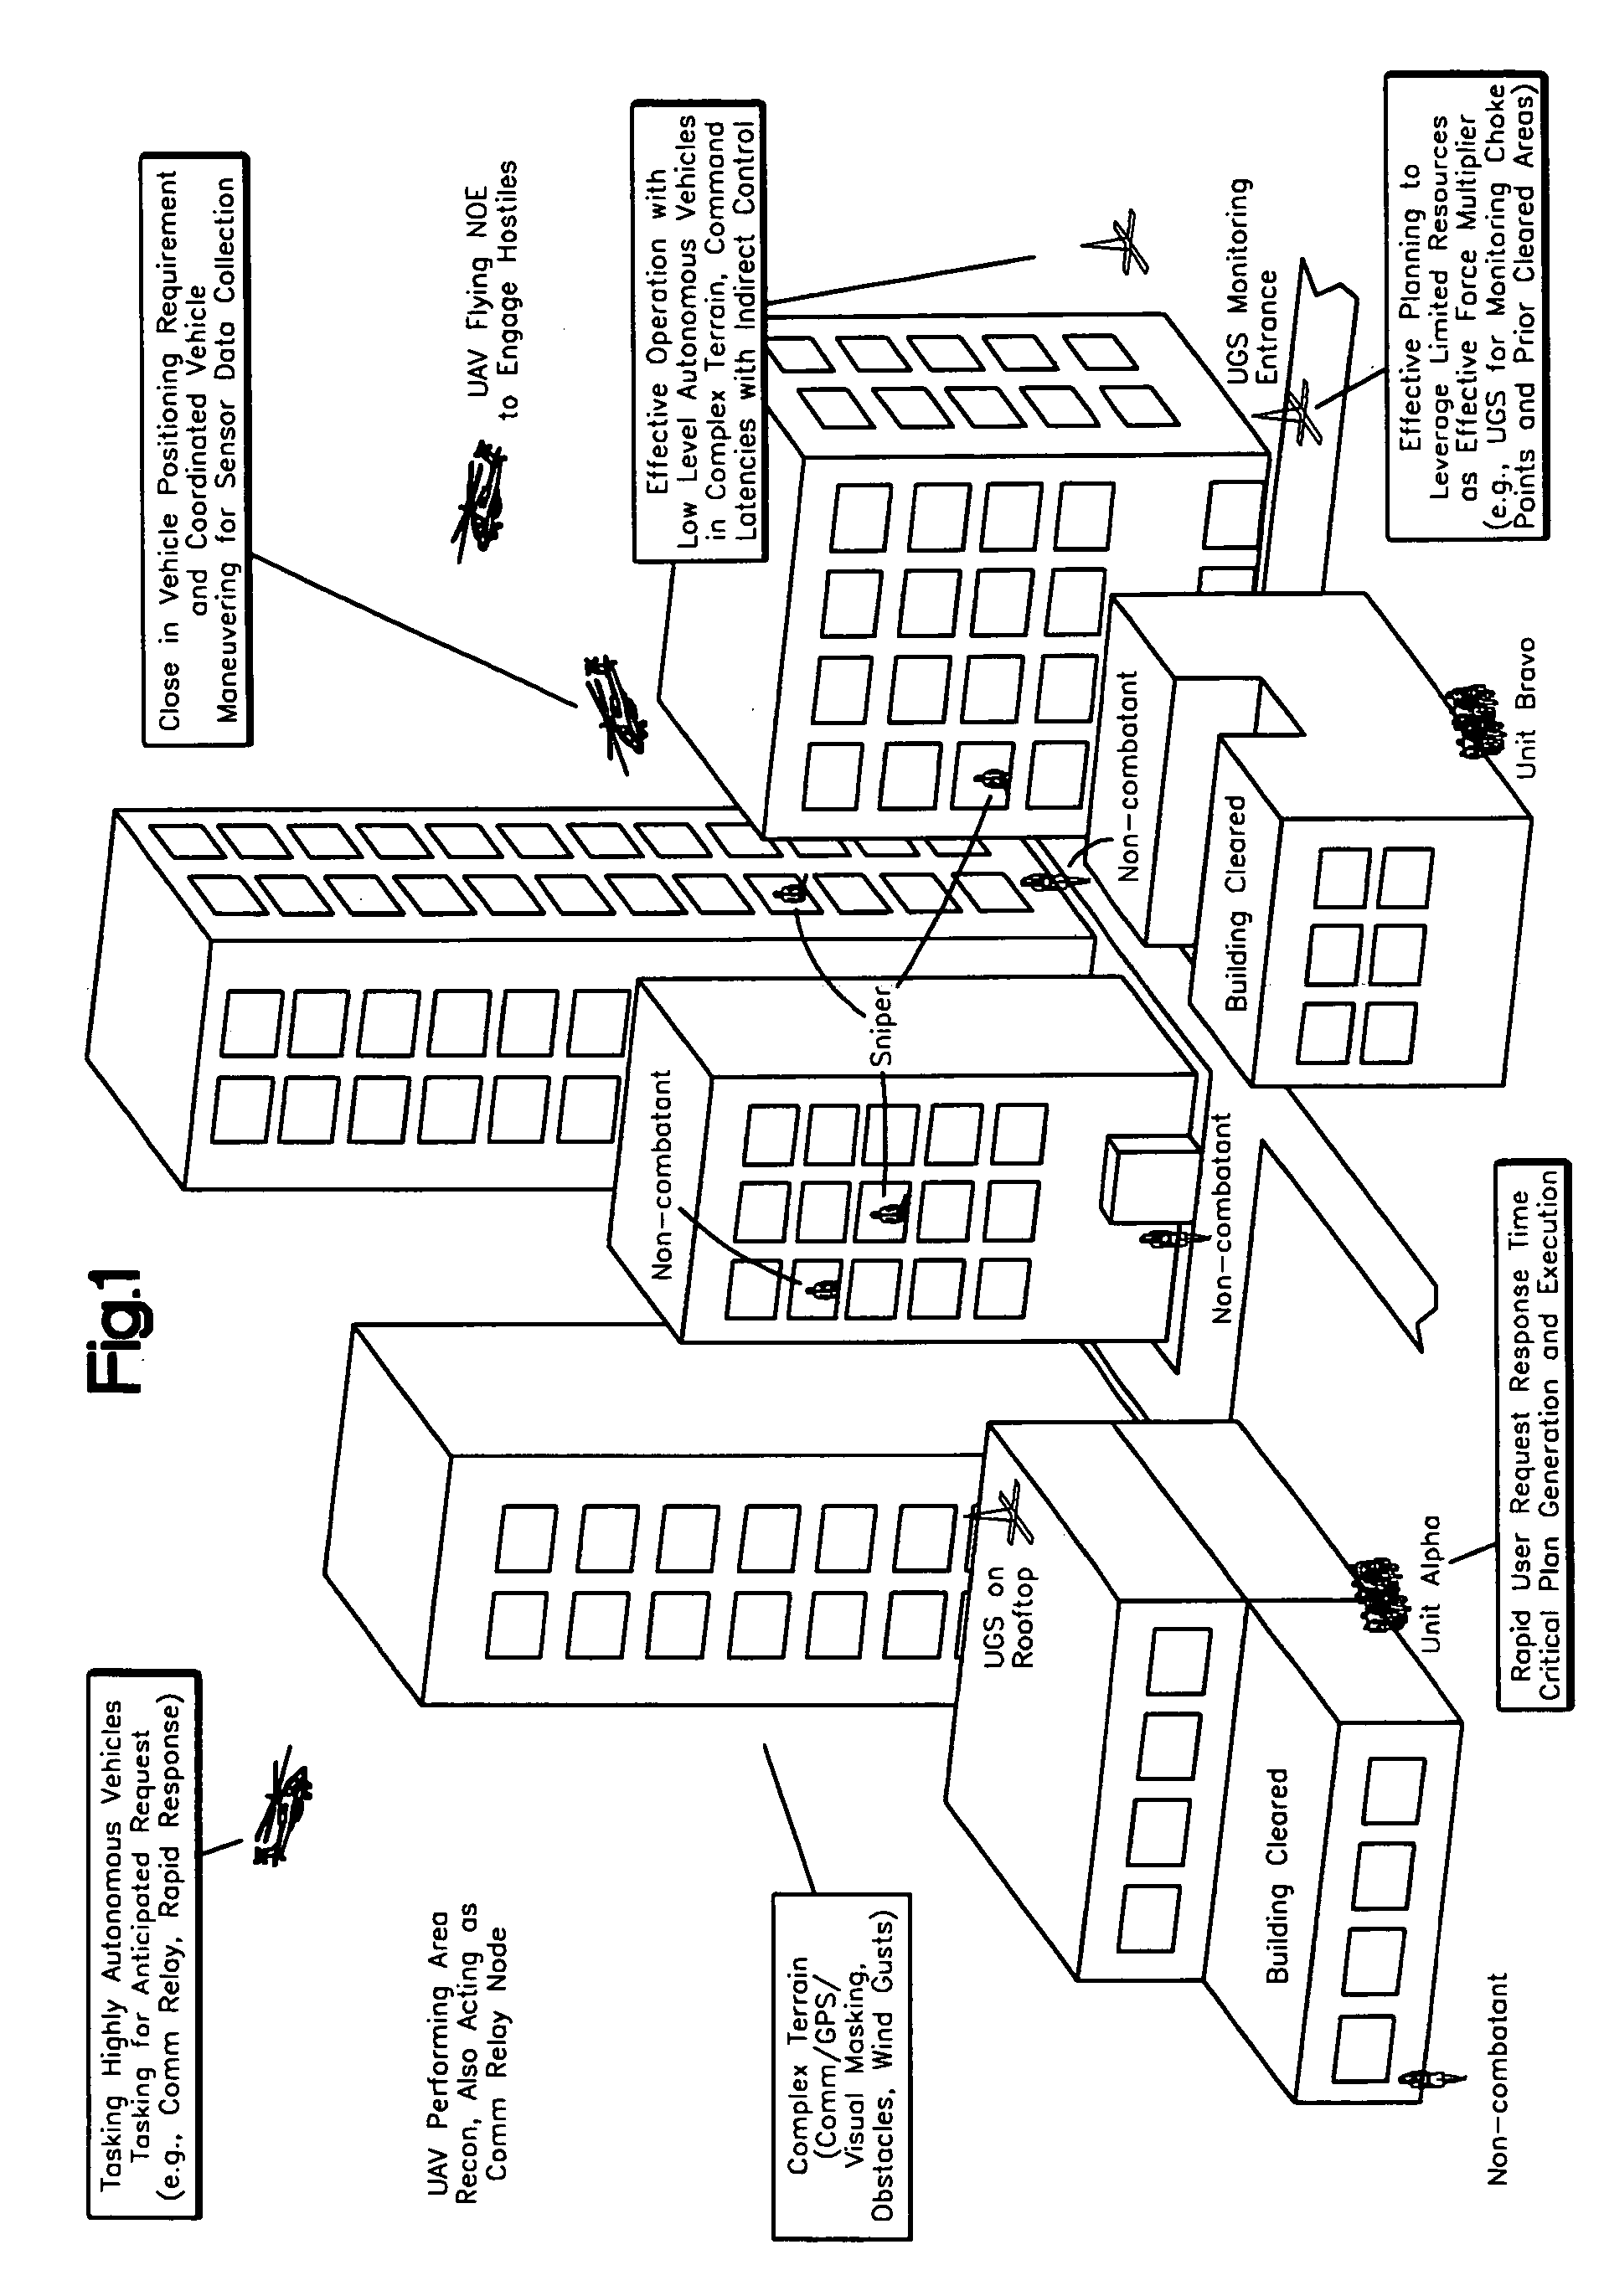 Mission planning system for vehicles with varying levels of autonomy